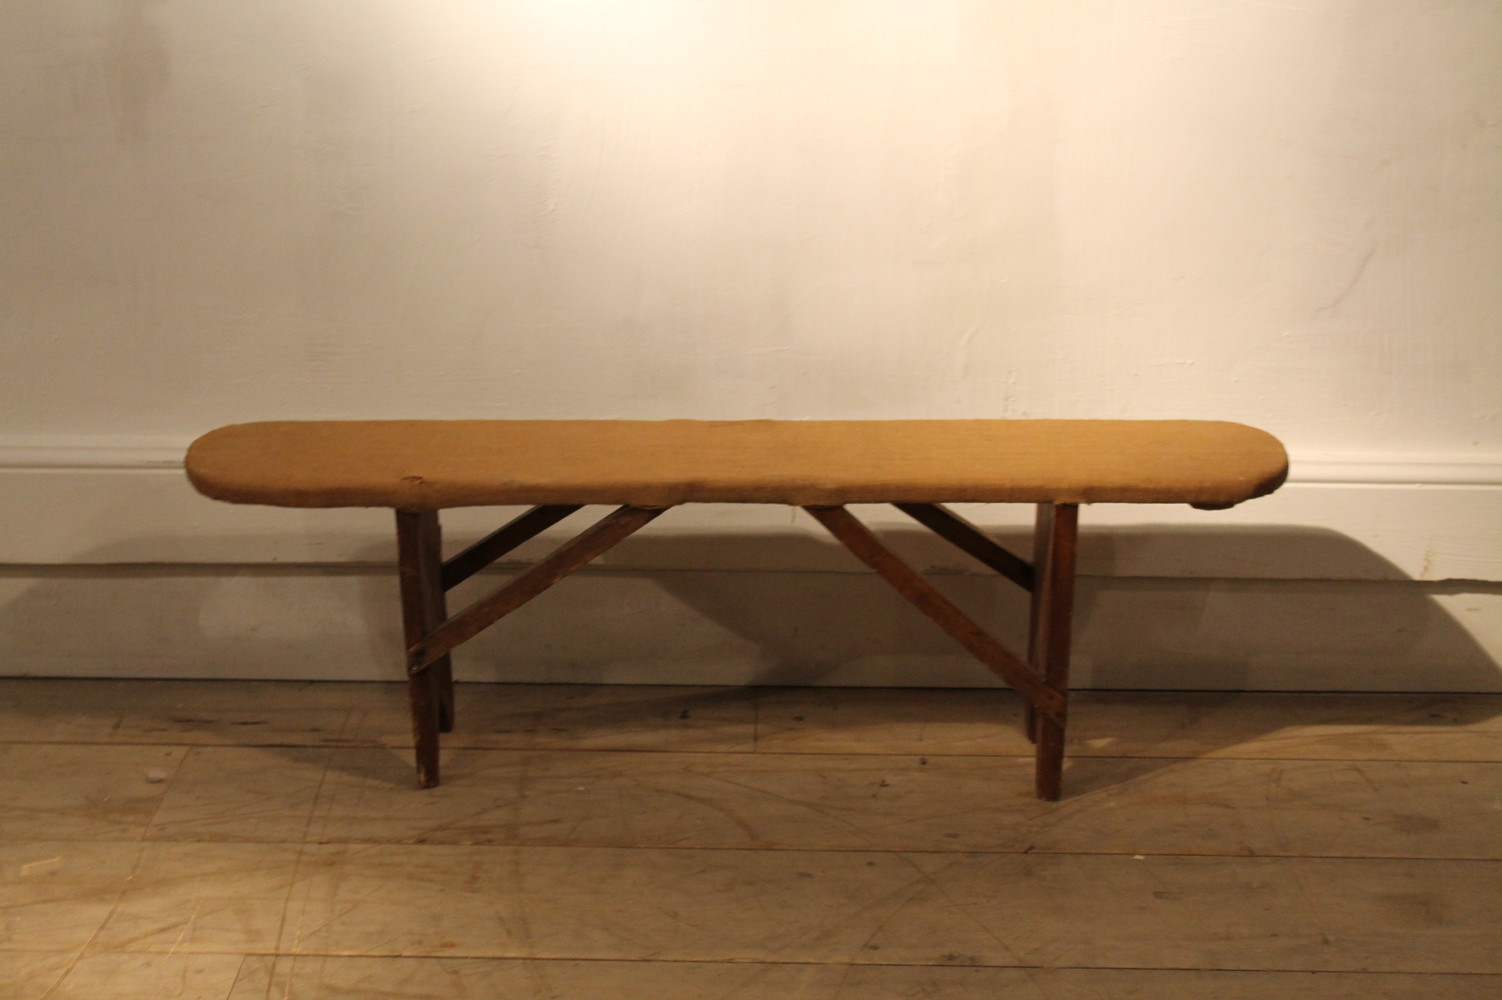 Set of different seize wooden benches (10)